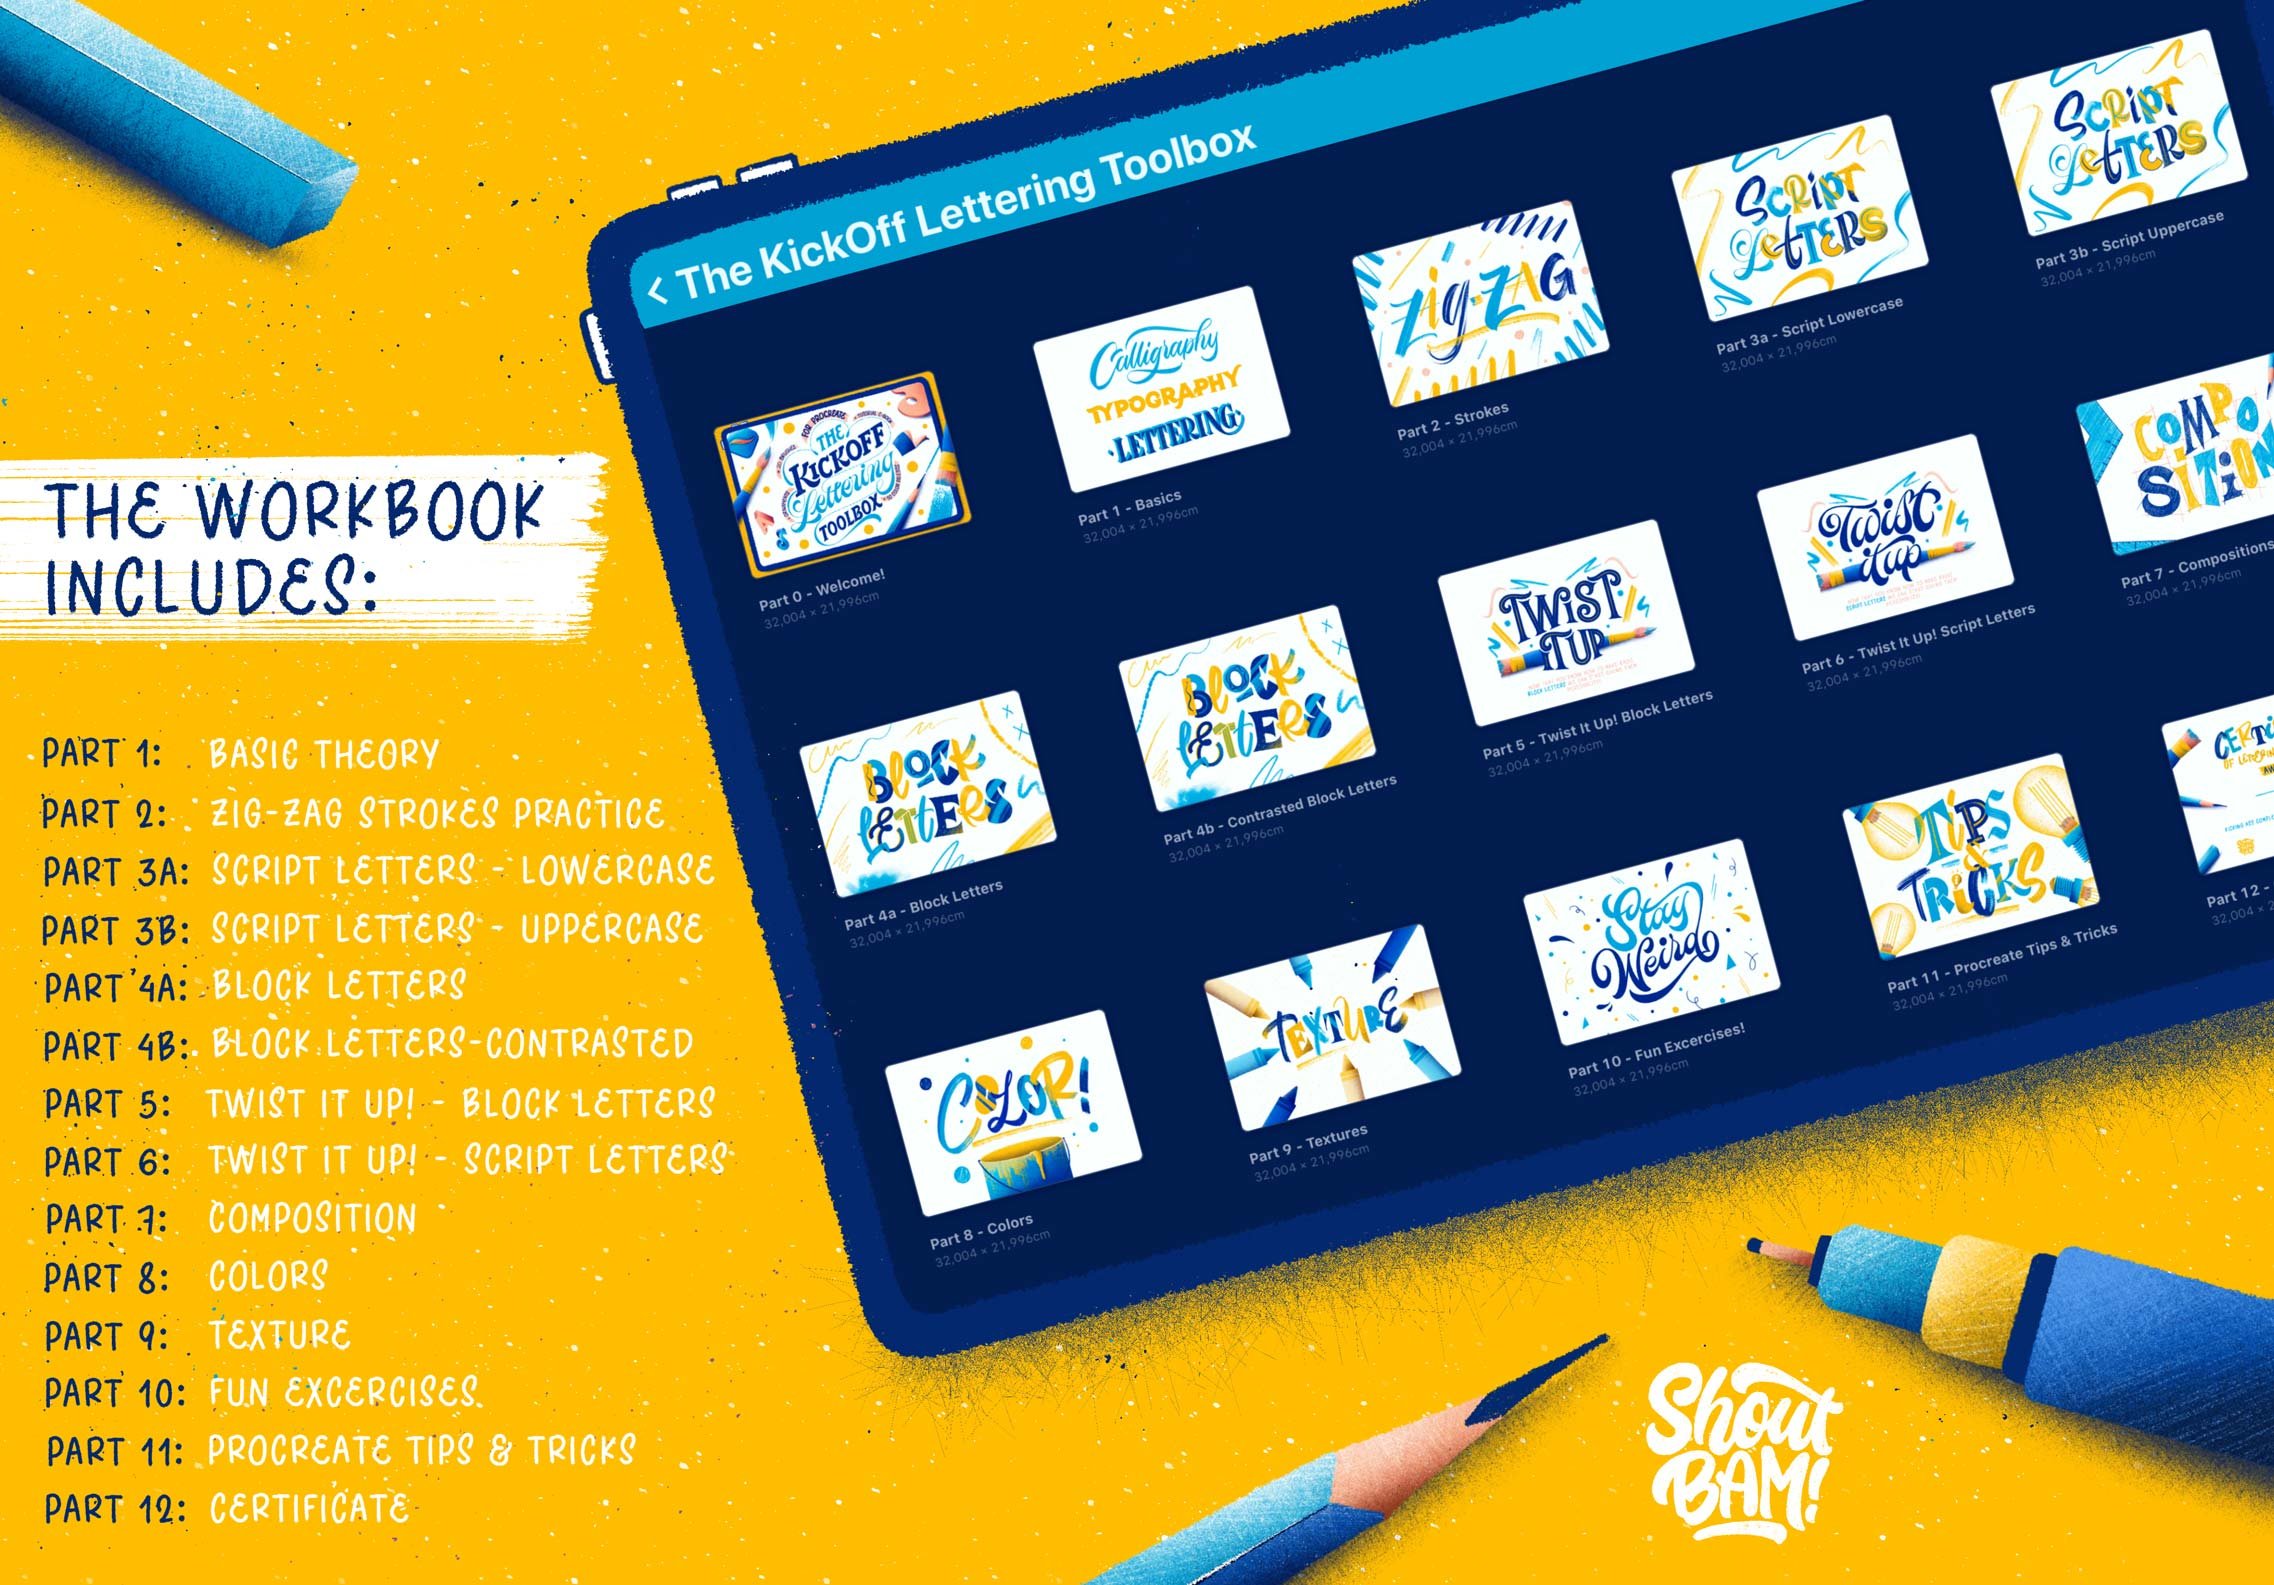 This workbook includes brushes to textures to practice sheets, fun exercises, ornaments, basic letter theory and much more.